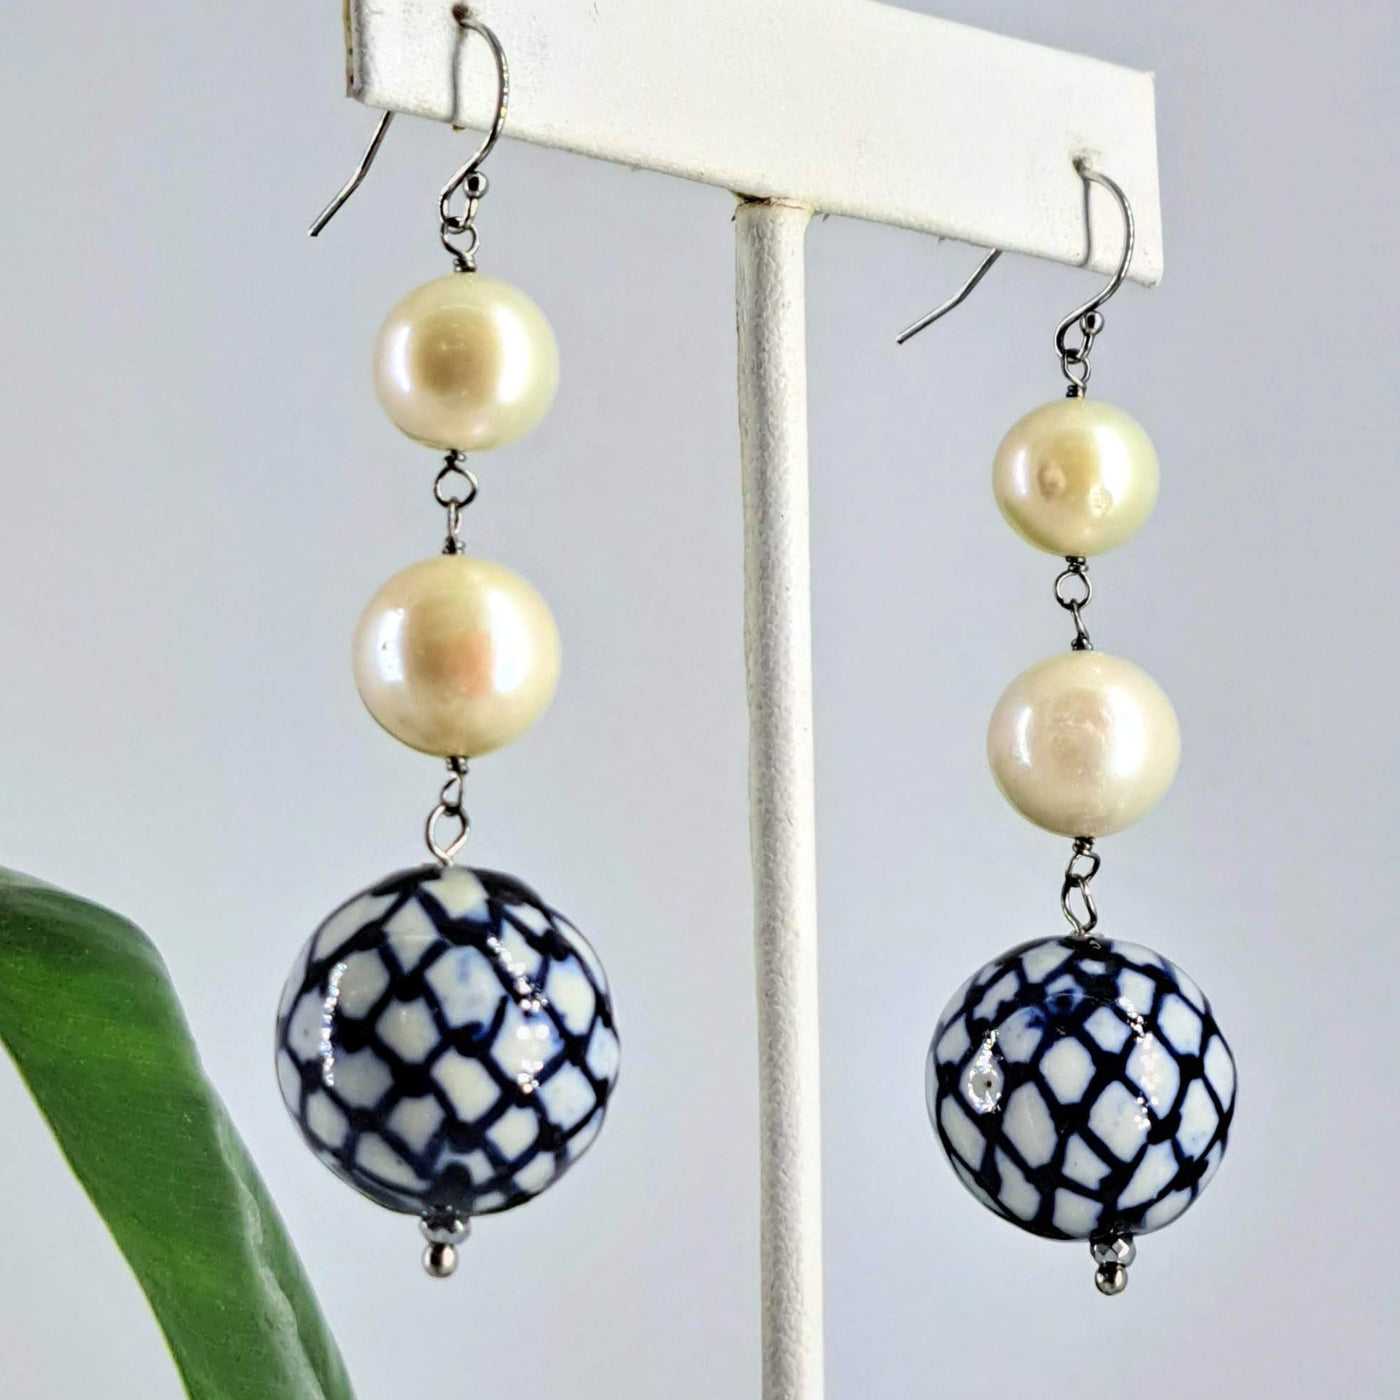 "Blue China" 2.75" Earrings - Pearls, Porcelain, Sterling